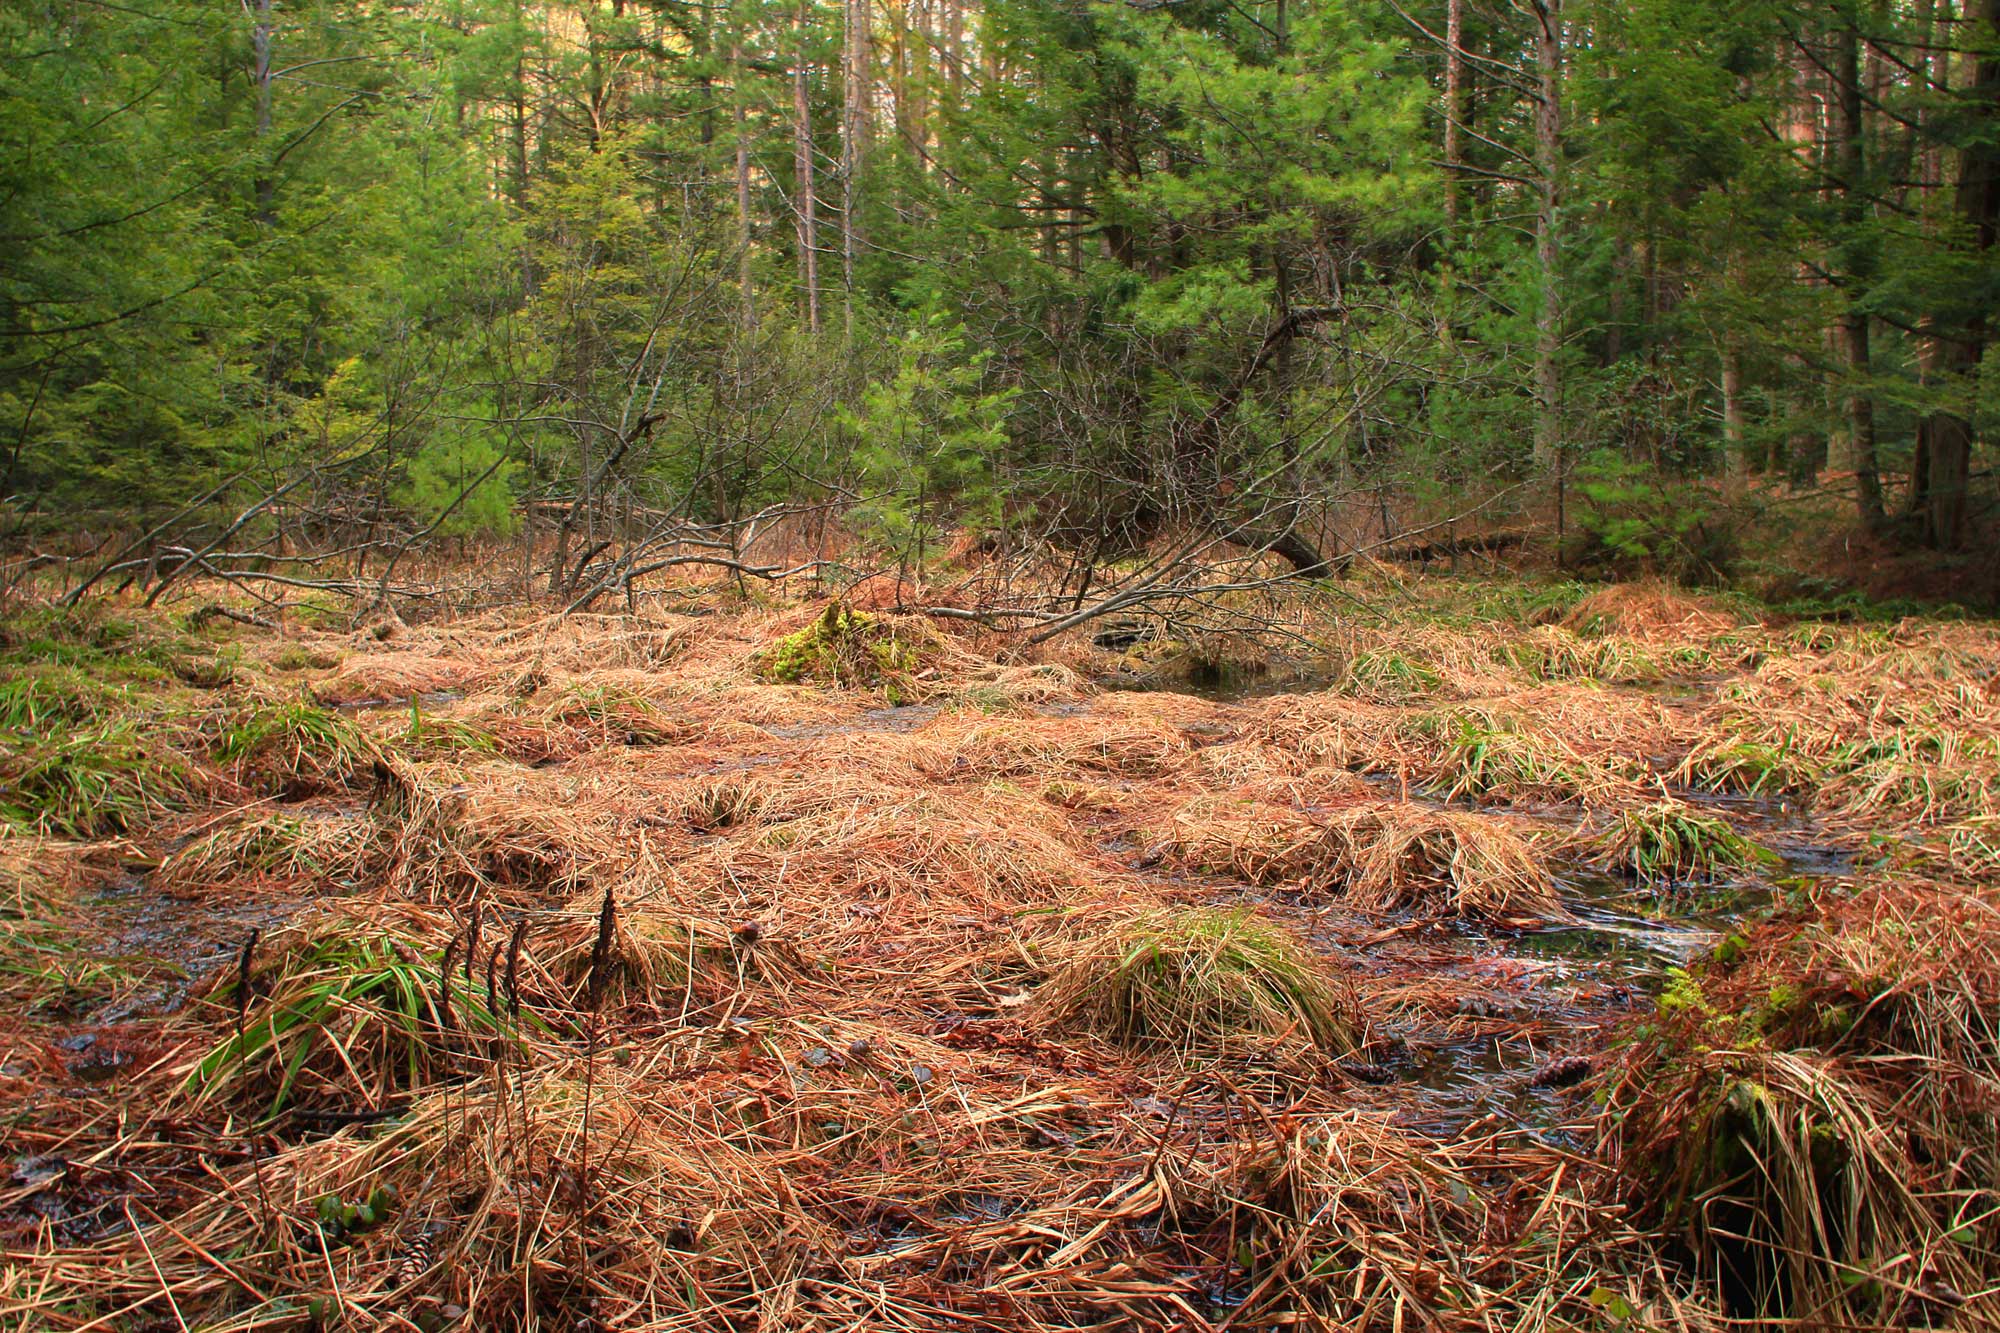 Photograph of a pingo scar in Bald Eagle State Forest, Pennsylvania. The photo shows a small wetland area covered with sedges and the spore-producing structures of sensitive fern. Pines flank the far edge of the wetland.